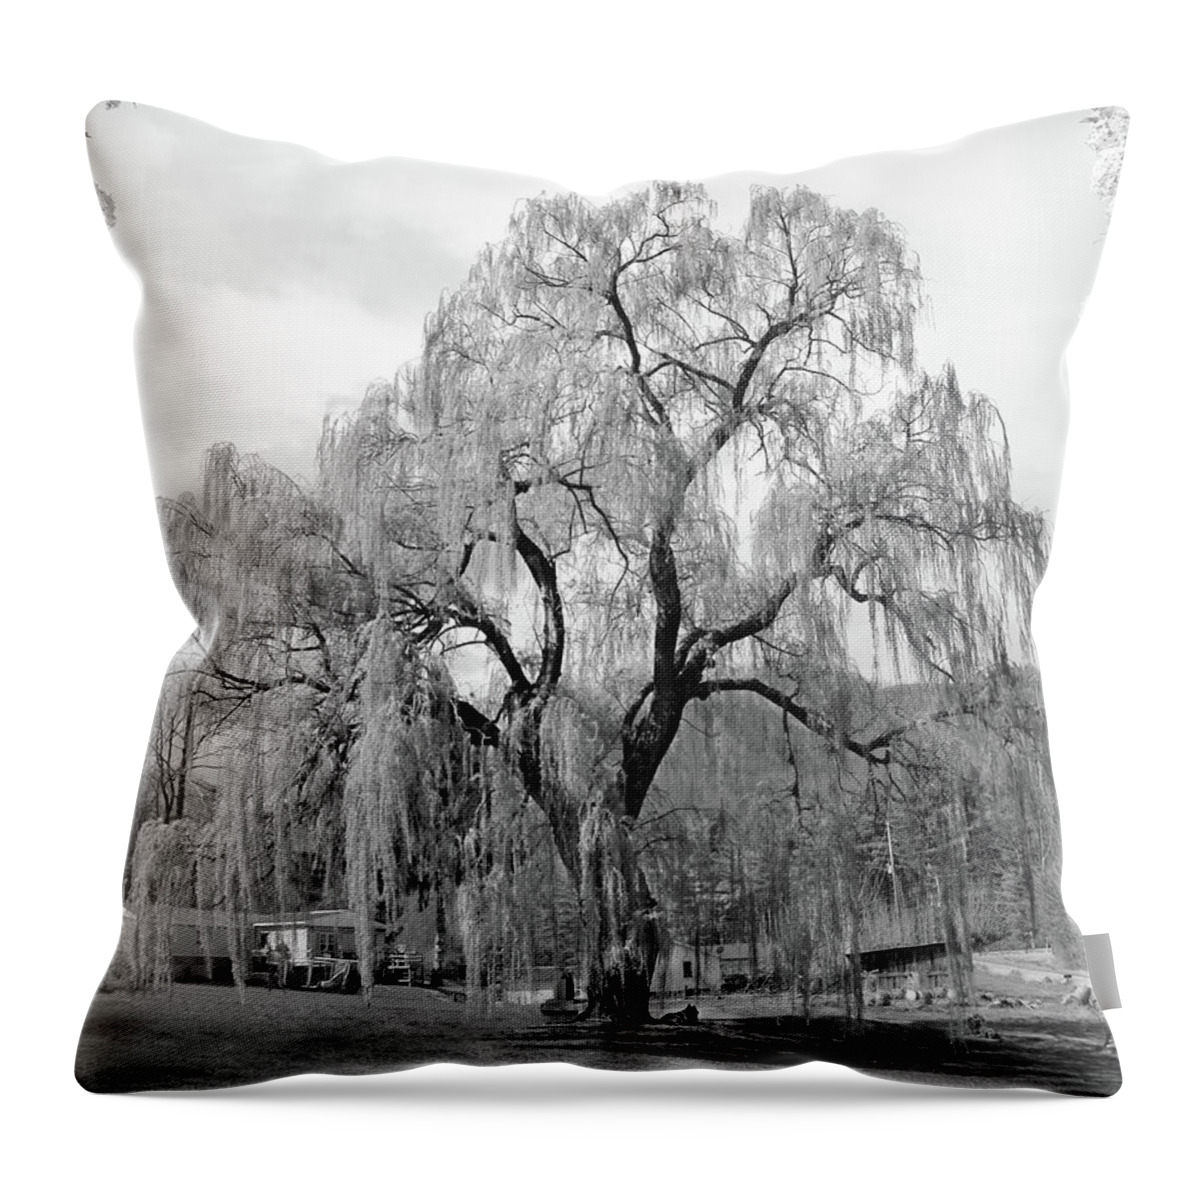 Willow Tree Throw Pillow featuring the photograph Weeping Willow by Mike McGlothlen